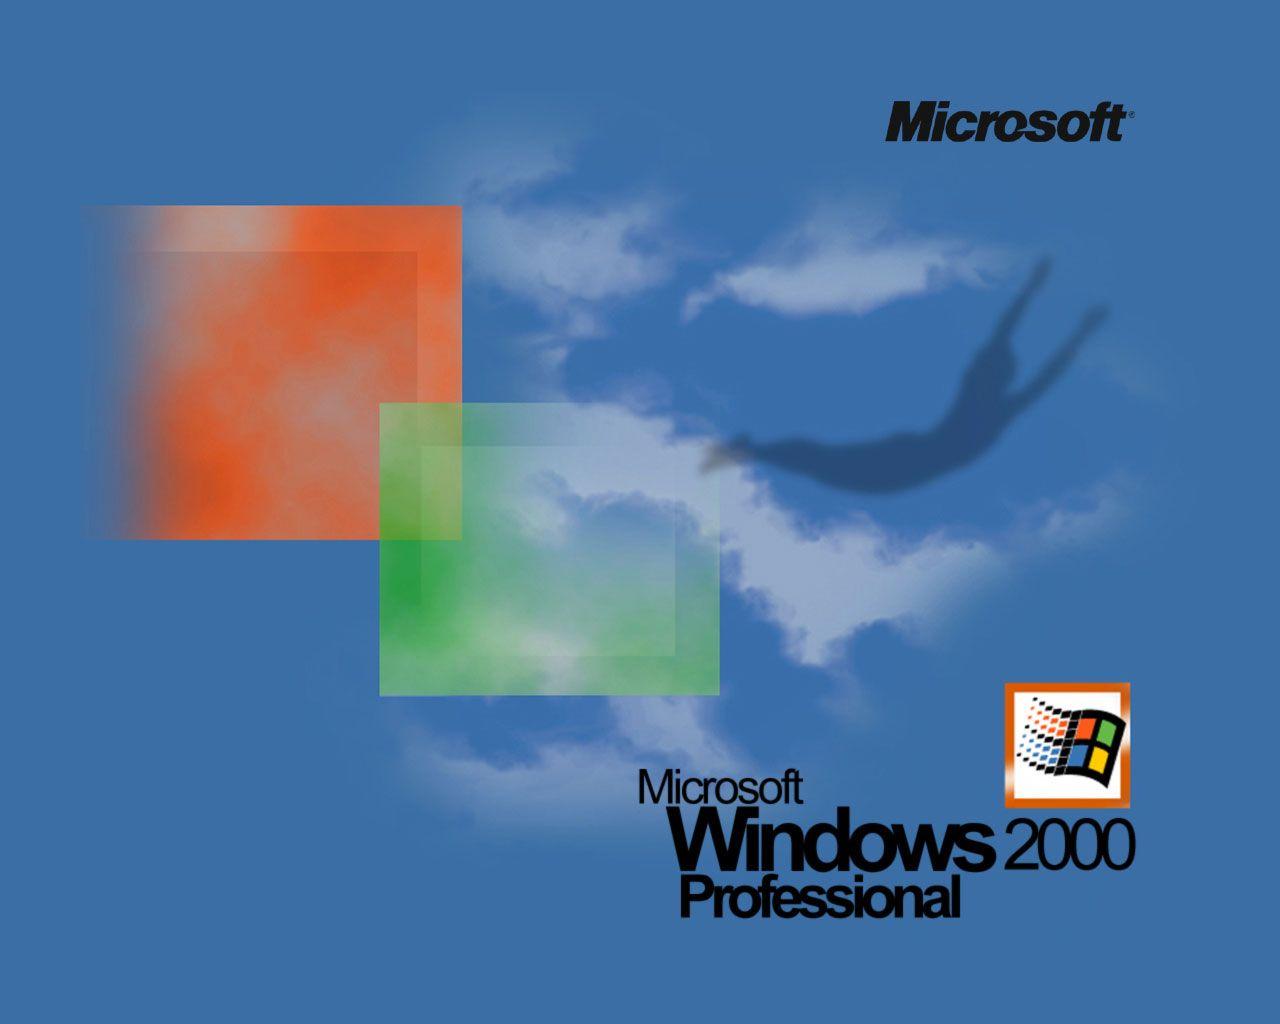 Windows Wallpaper. Just For You Forever: Windows 2000 Professional